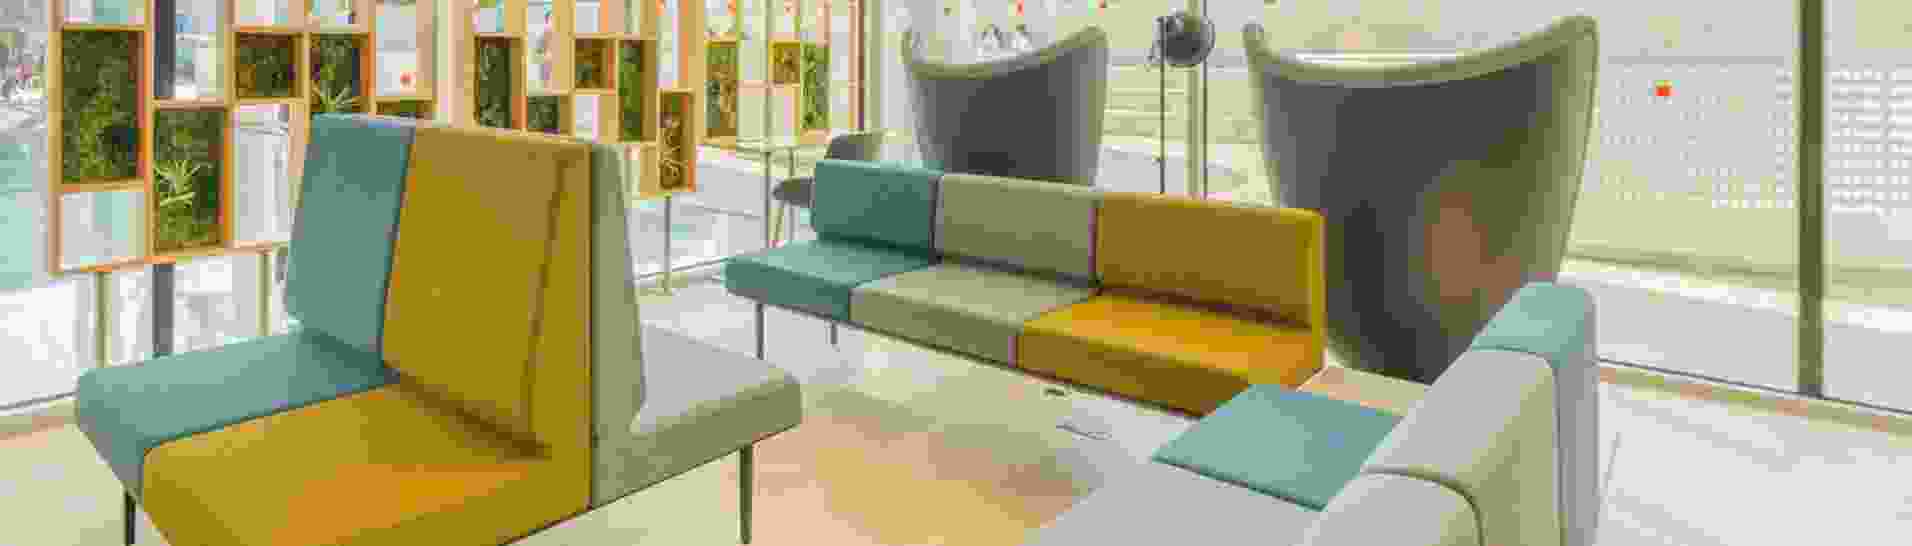 Therapeutic spaces, when the design of the hospital environment acts as a third caregiver